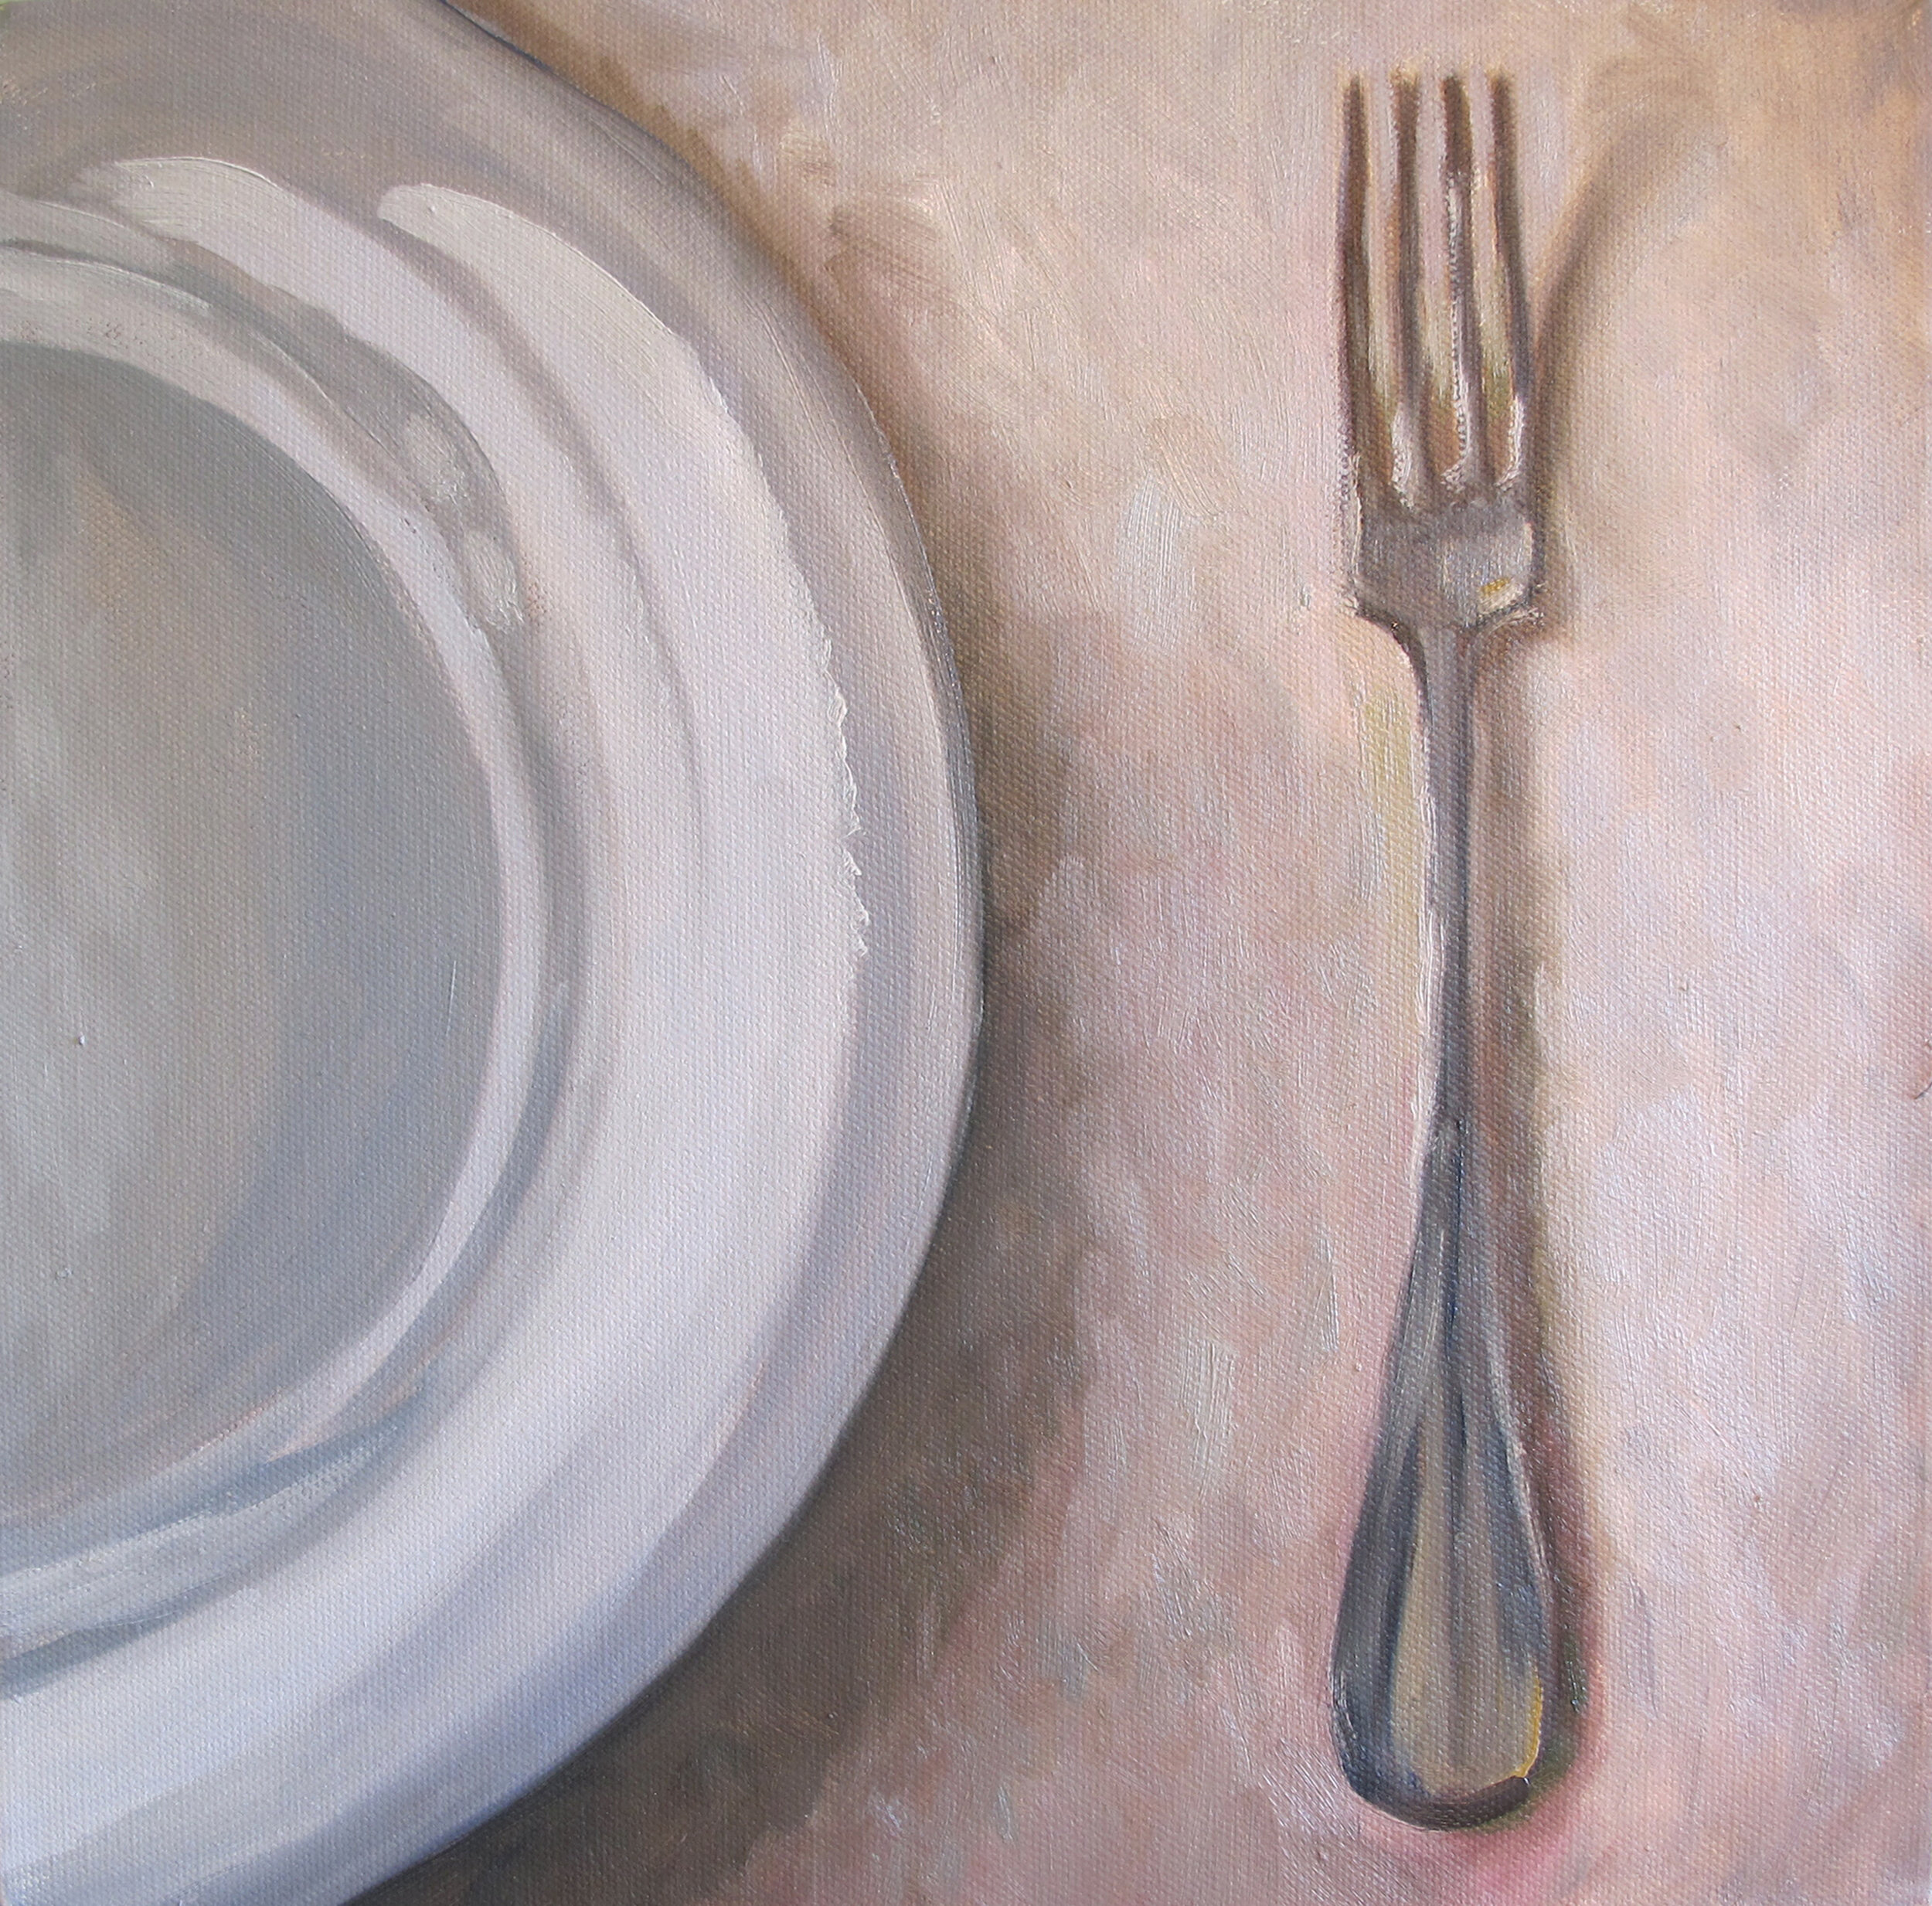 Plate and fork